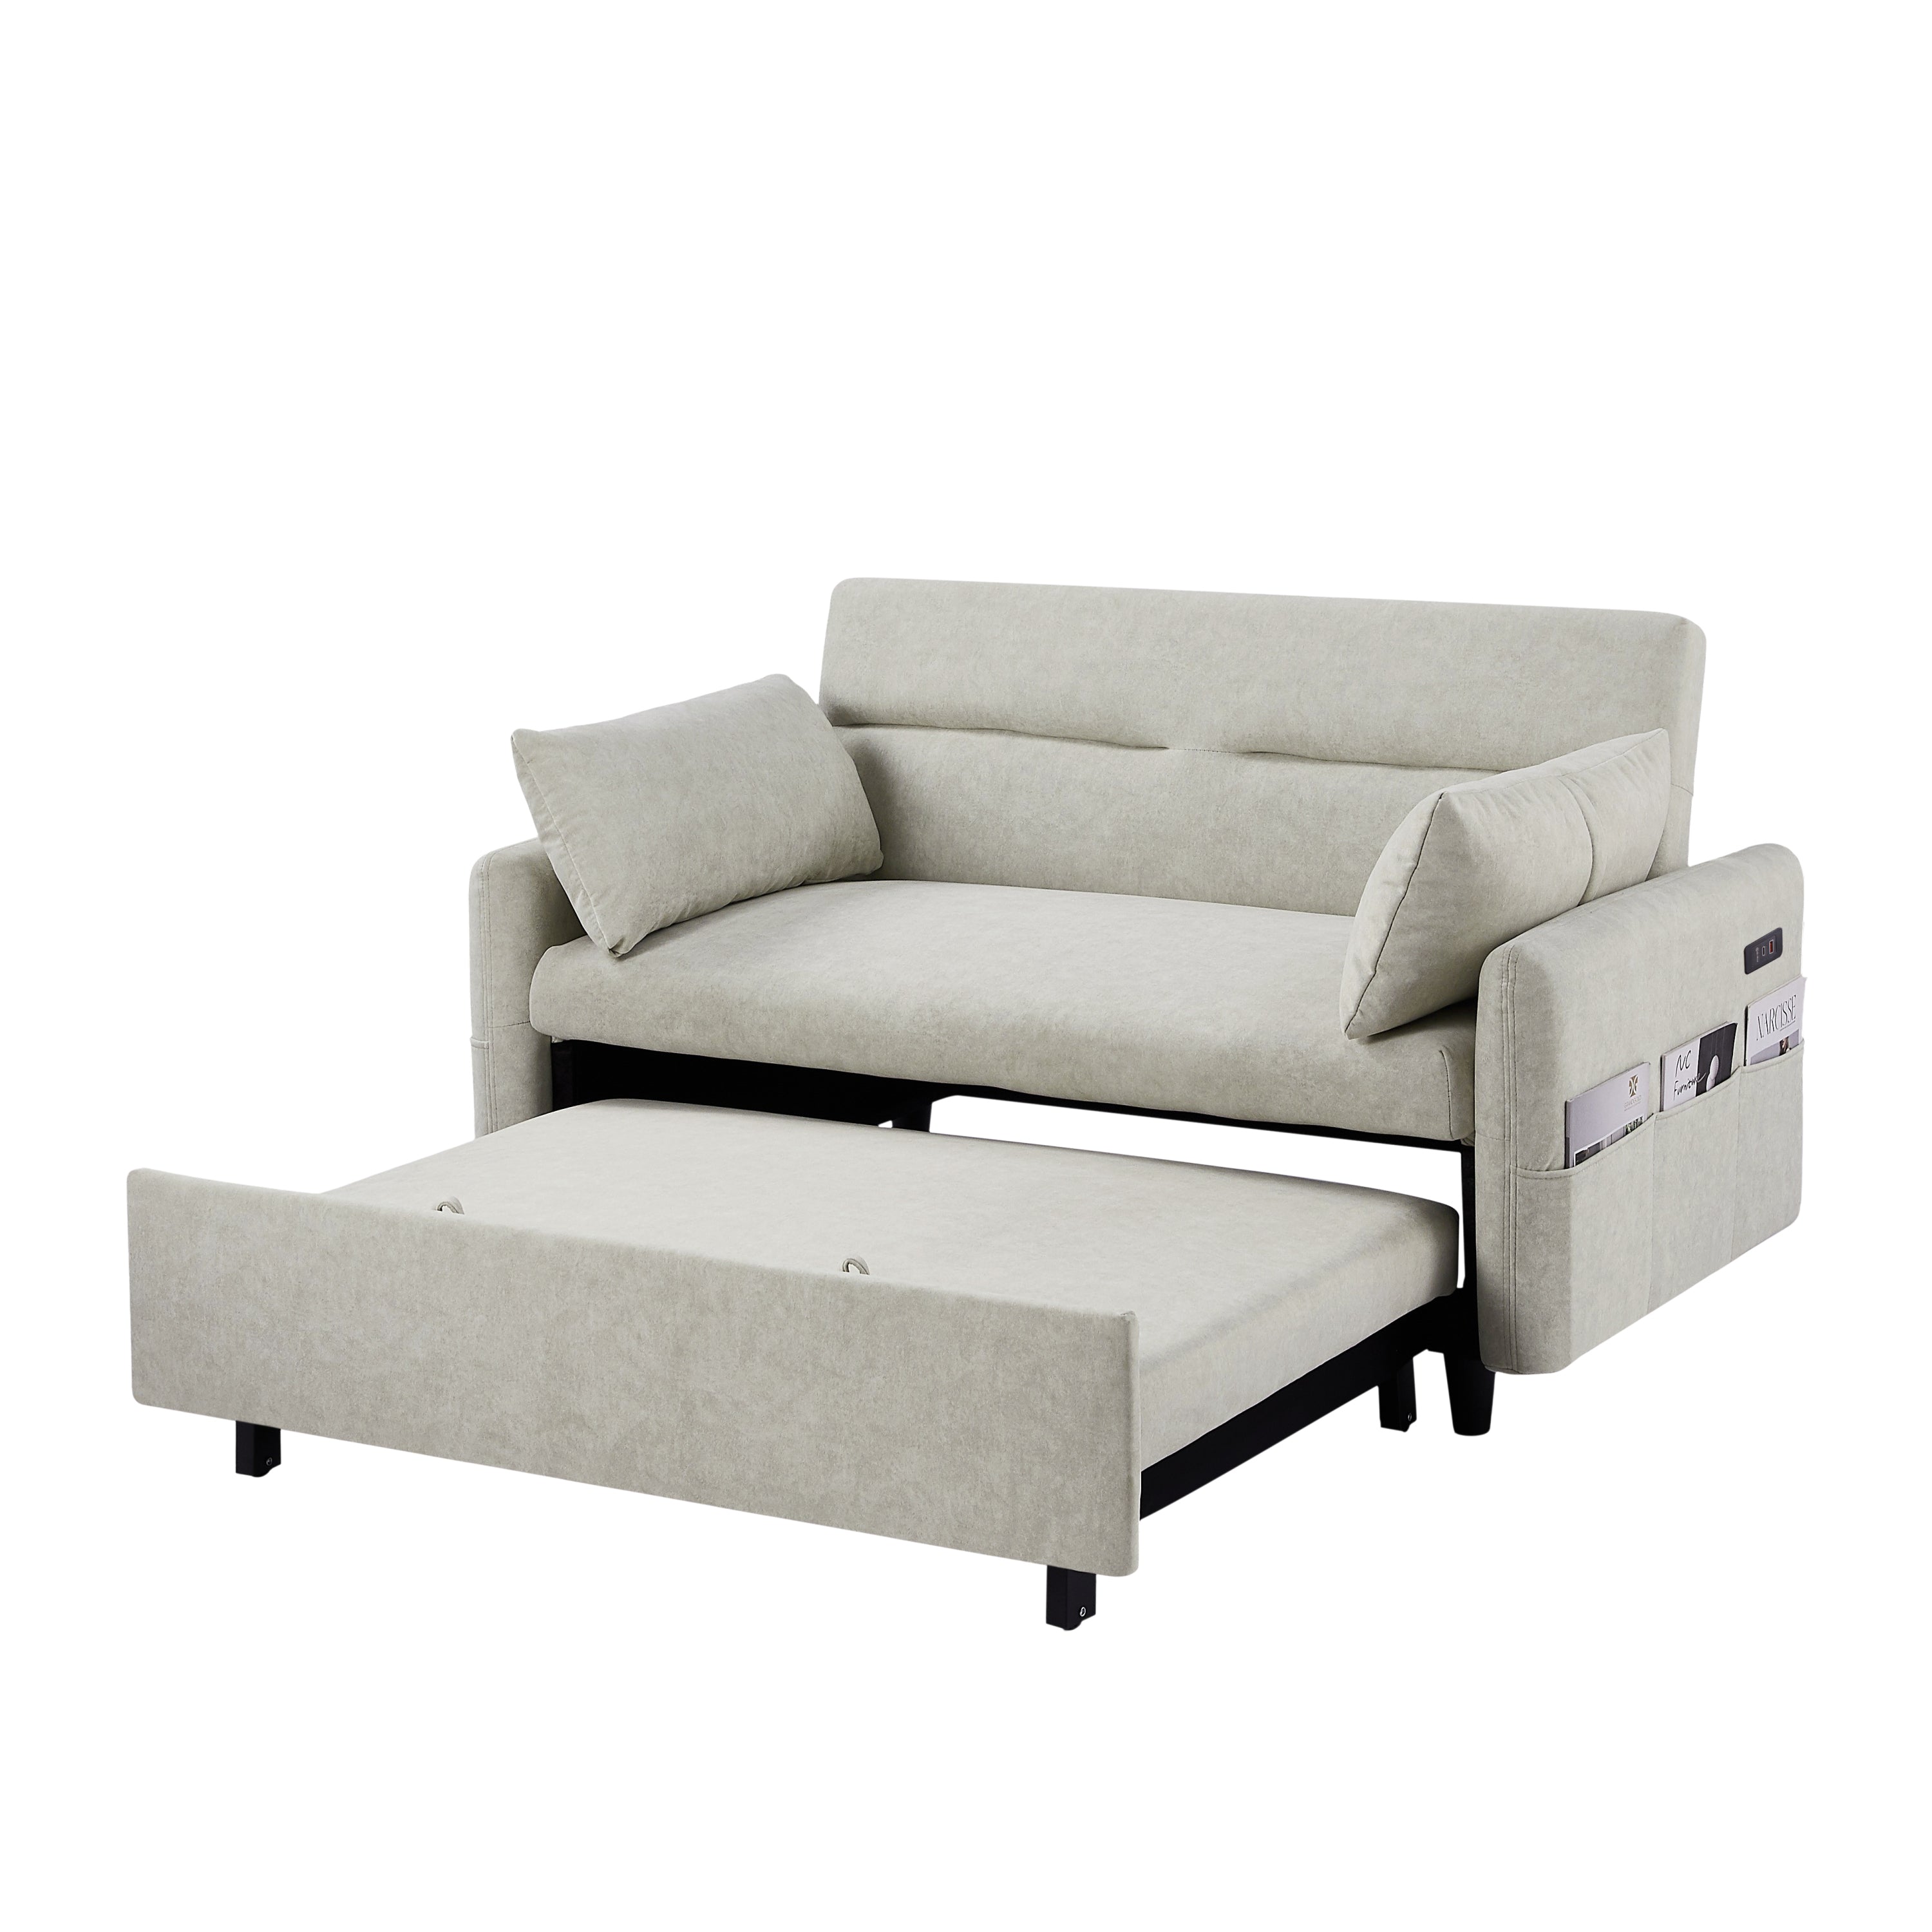 Mikas 55" Micofiber Pull Out Sleep Sofa Bed with USB Ports and Storage Pockets